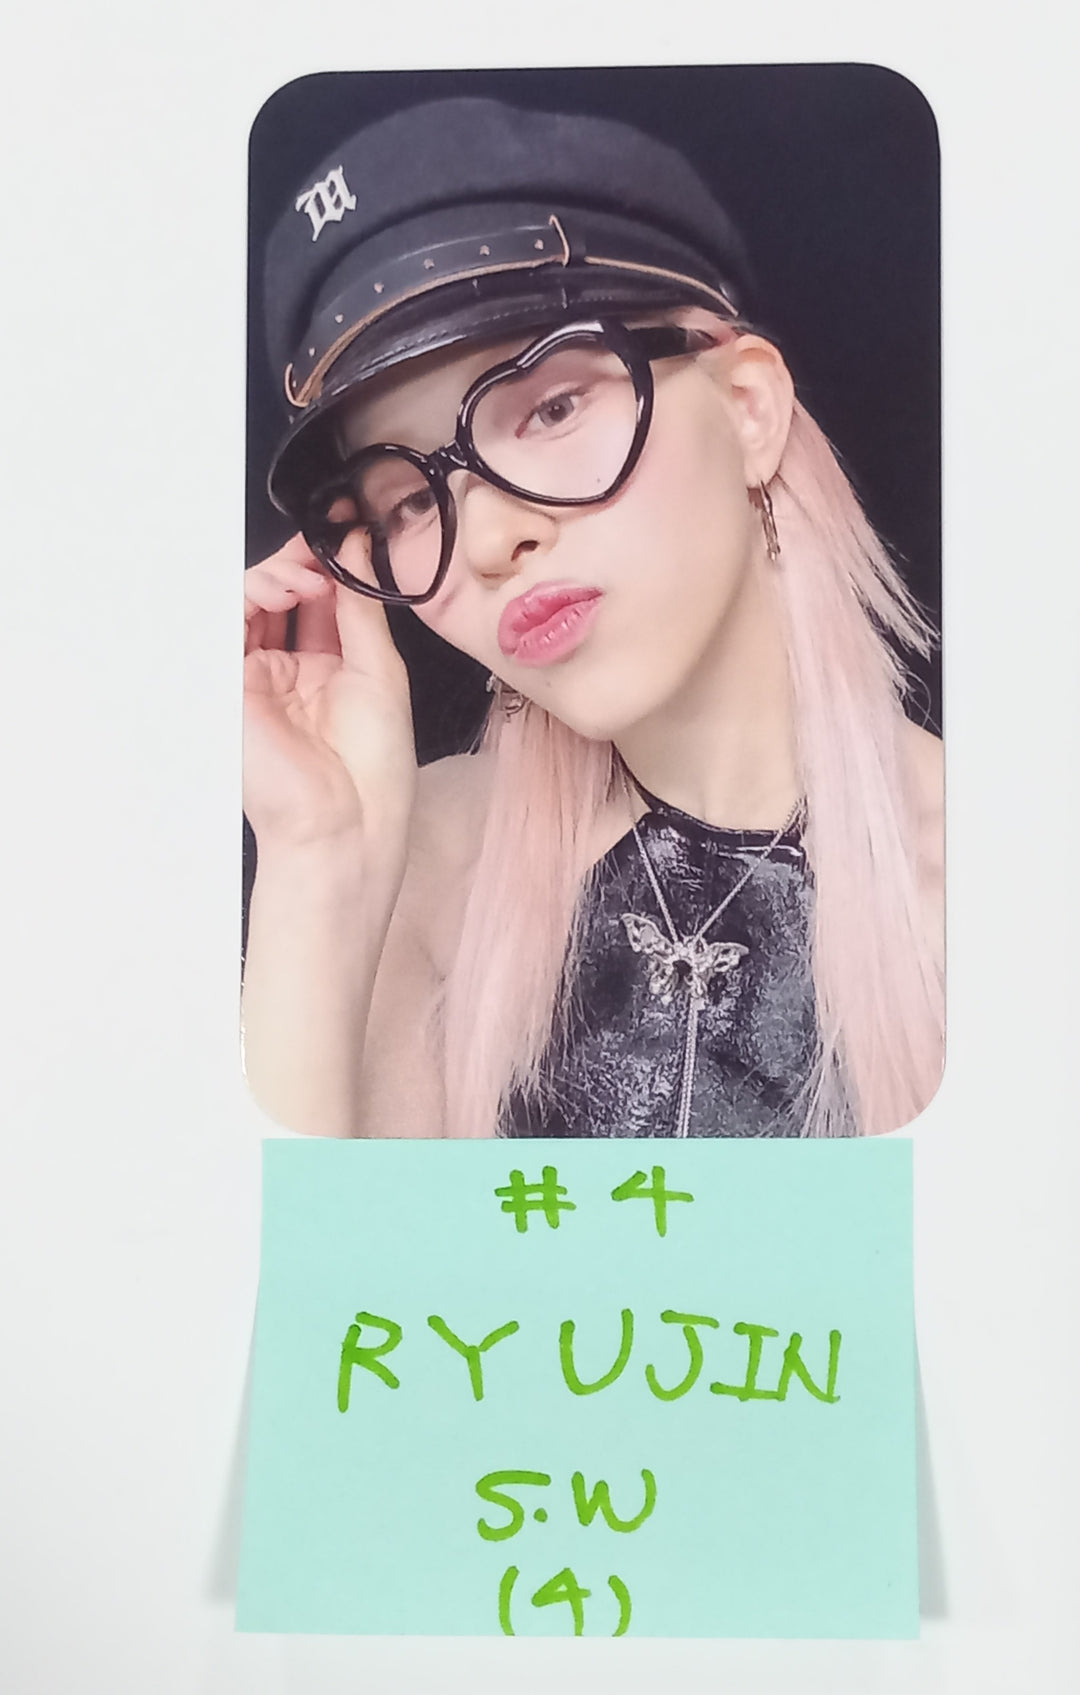 ITZY "BORN TO BE" - Soundwave Fansign Event Photocard Round 2 [24.2.8]